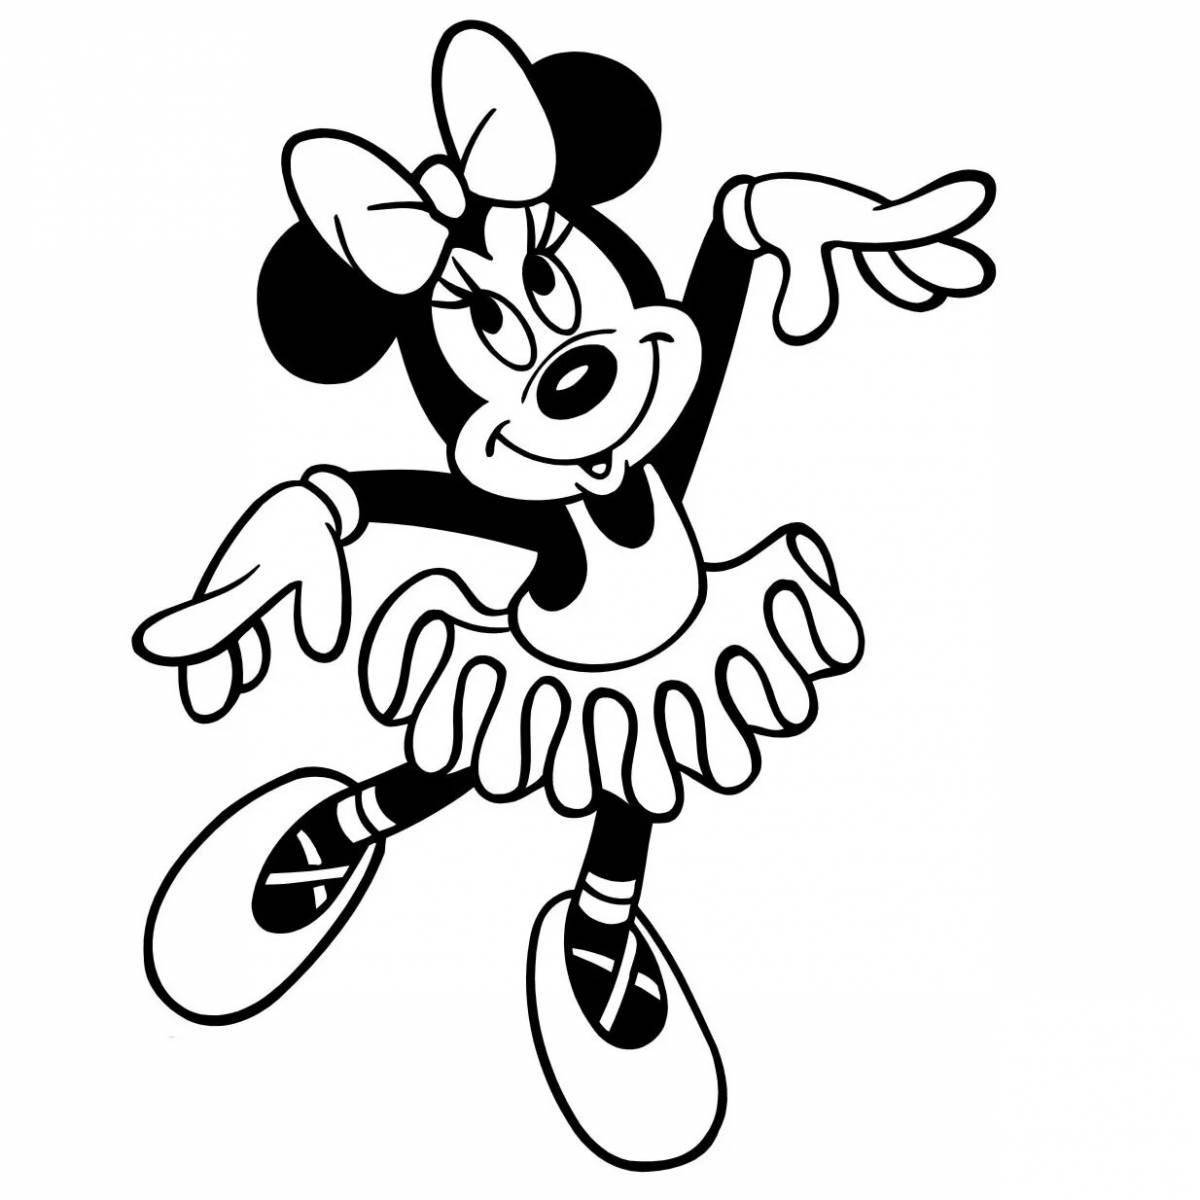 Coloring nice minnie mouse